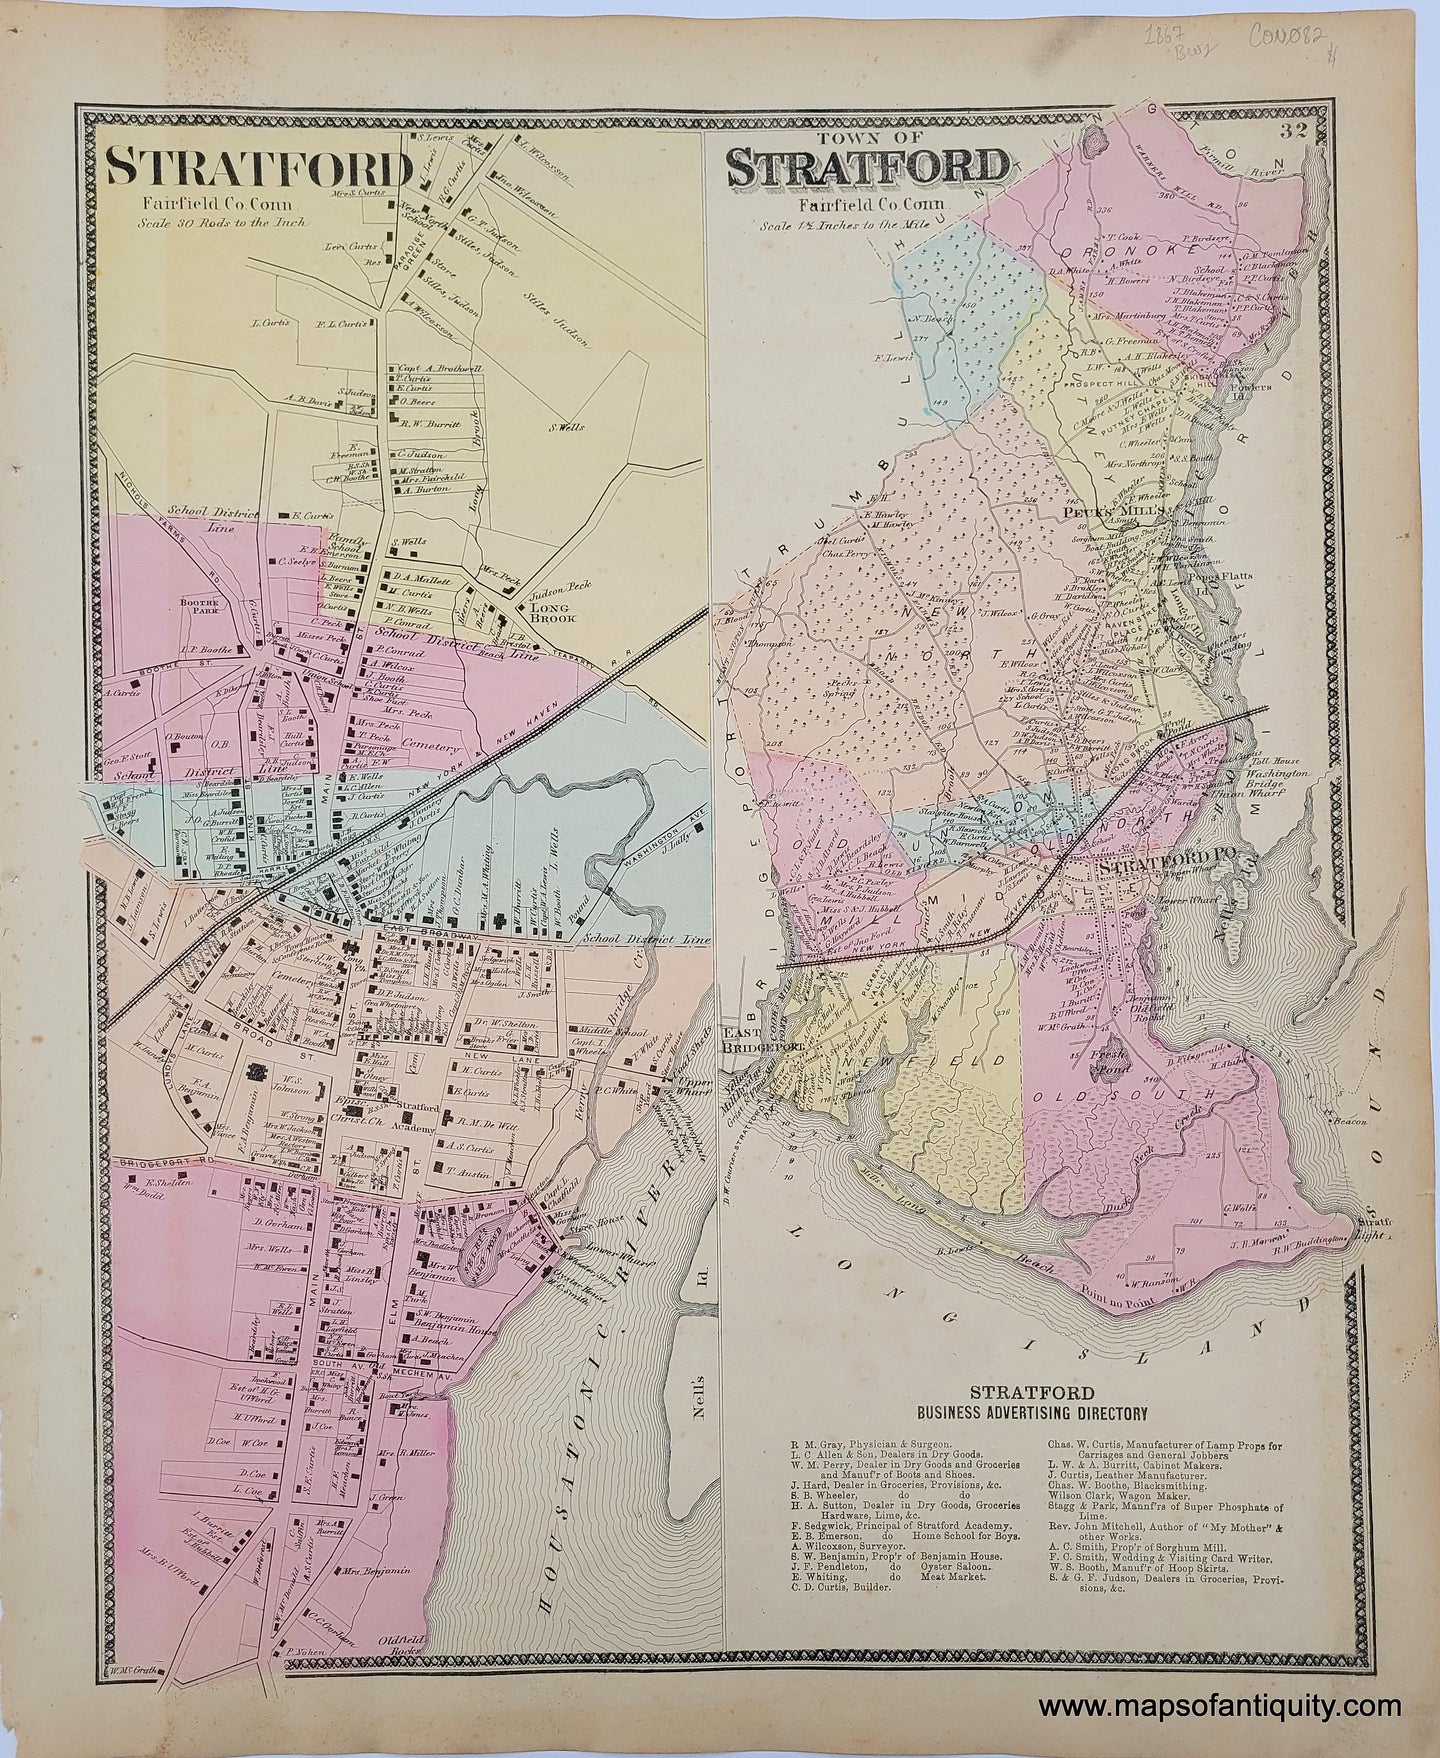 Antique-Hand-Colored-Map-Stratford/Town-of-Stratford-(CT)-***********-United-States-Northeast-1867-Beers-Maps-Of-Antiquity